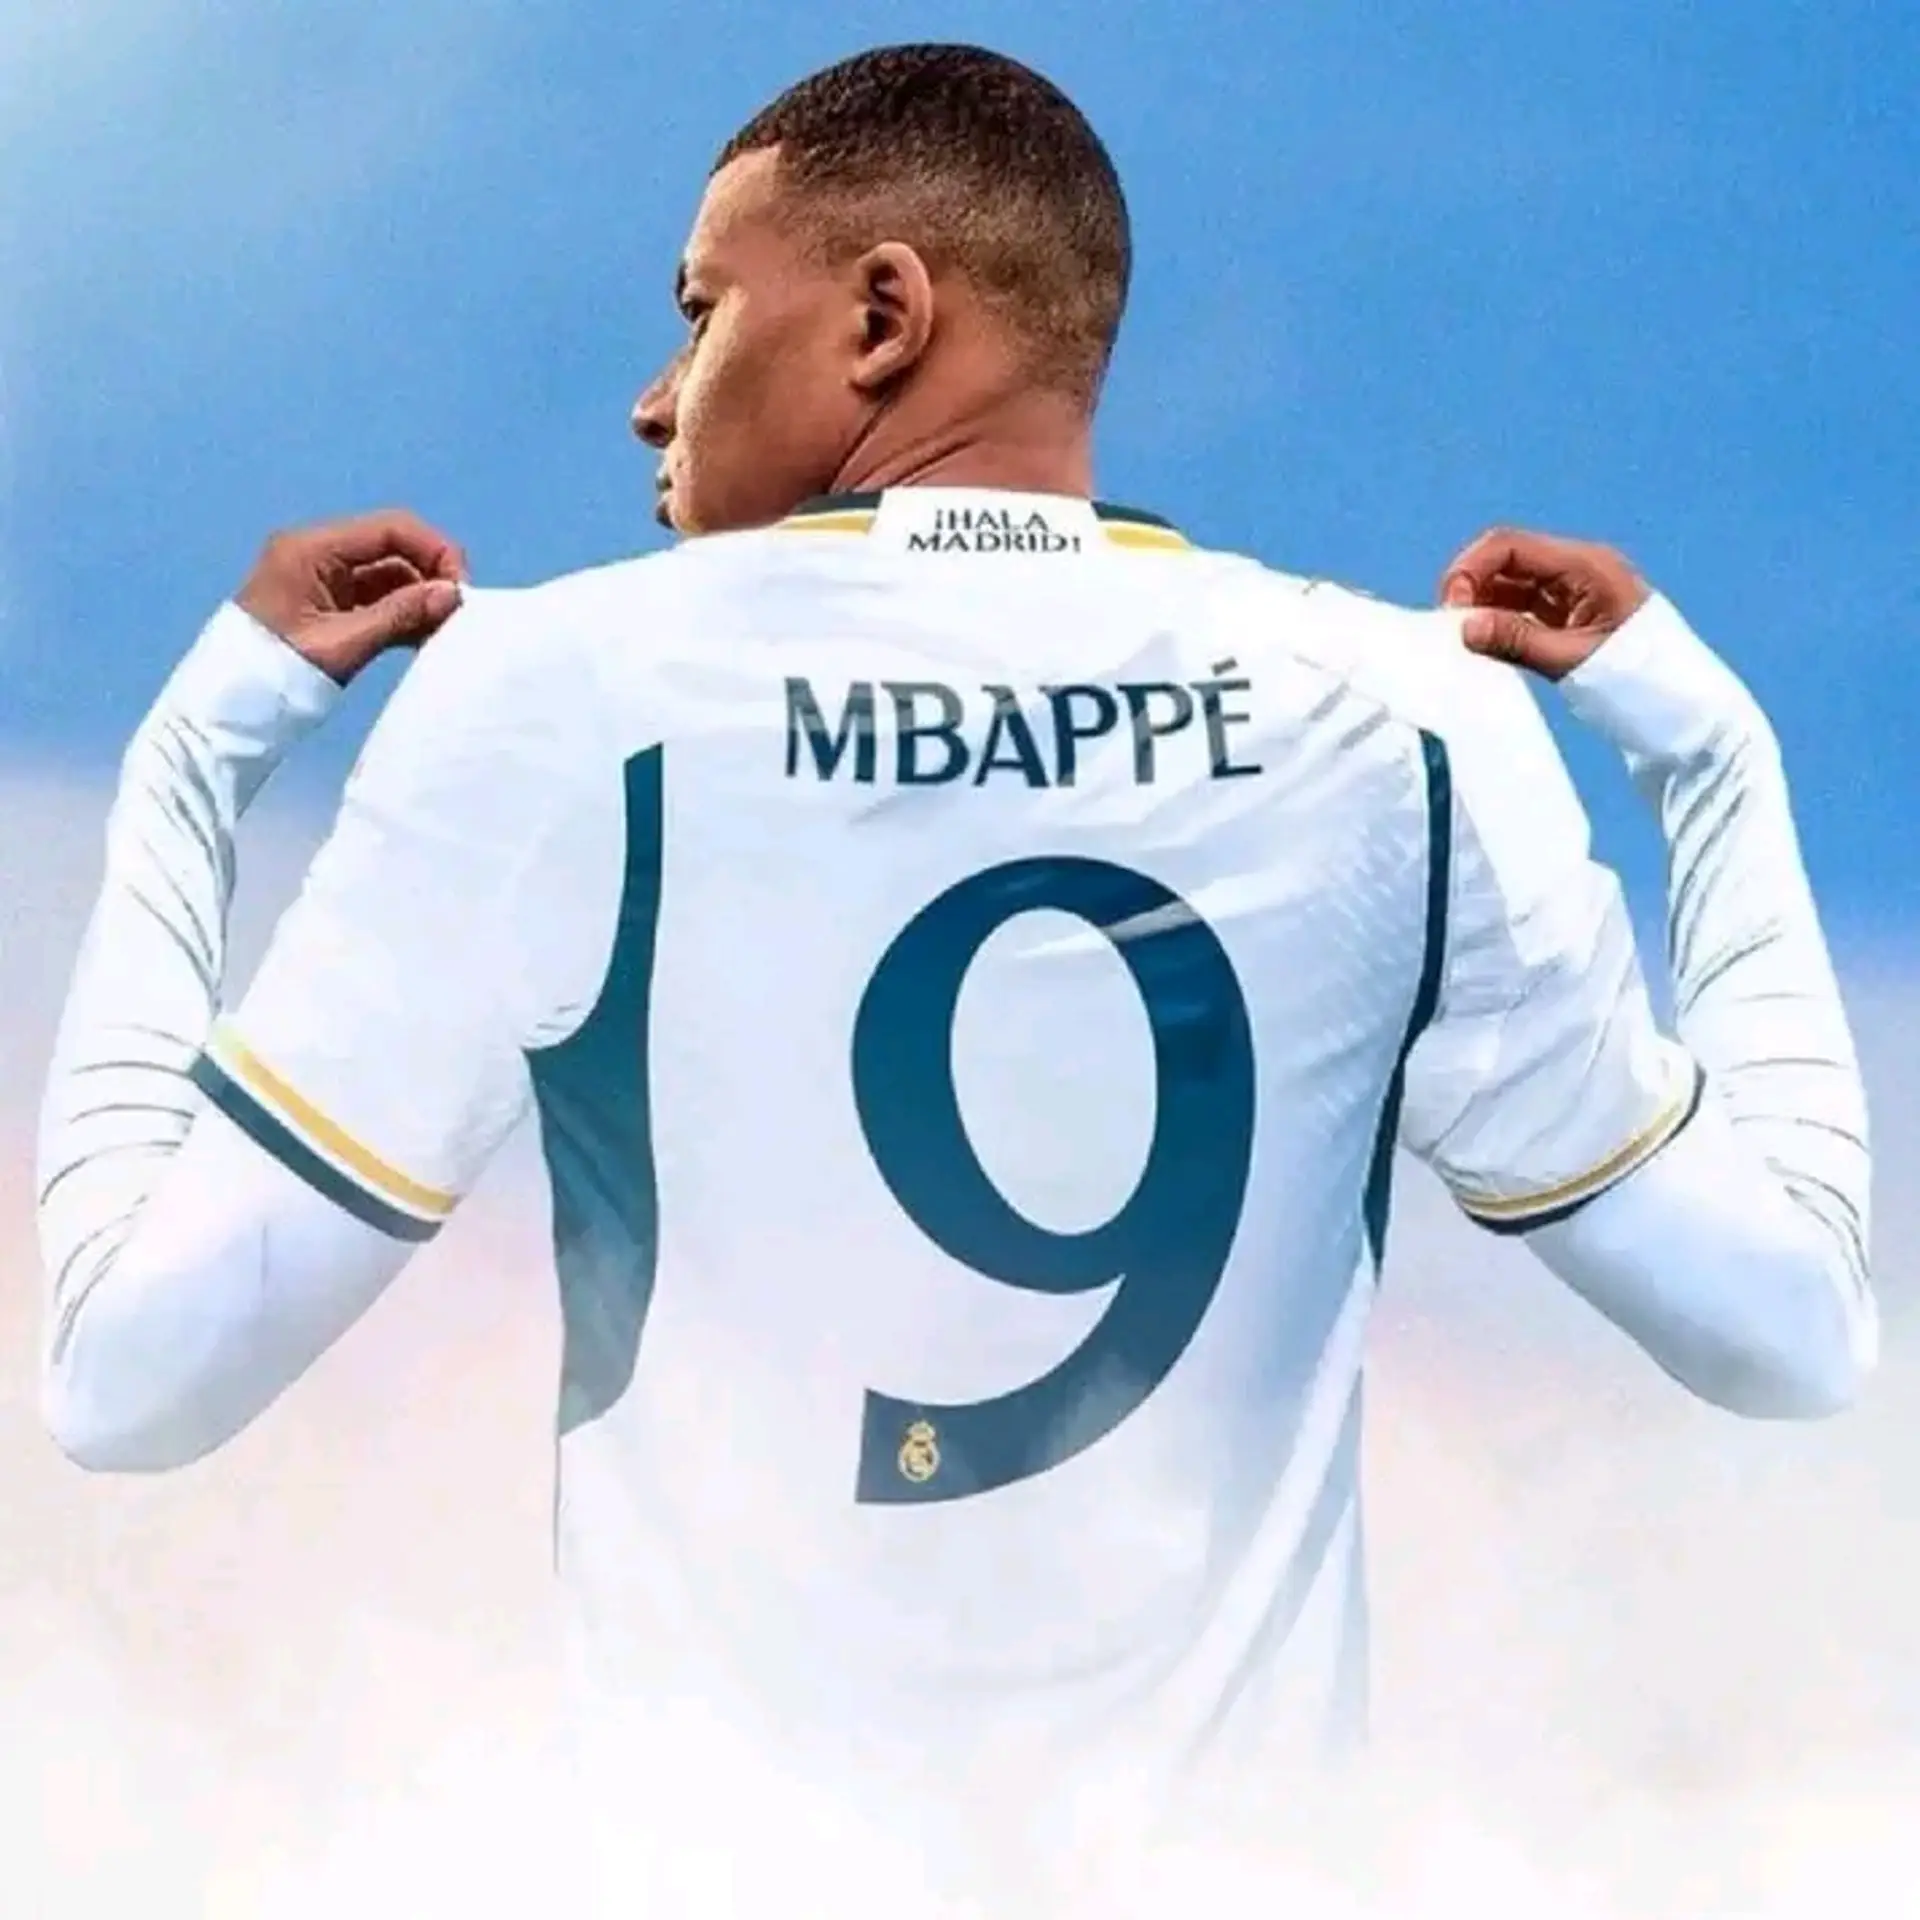 Real Madrid Aborts Kylian Mbappe Signing, Can It Be Trusted? Here I Discuss Why It Is Not Possible